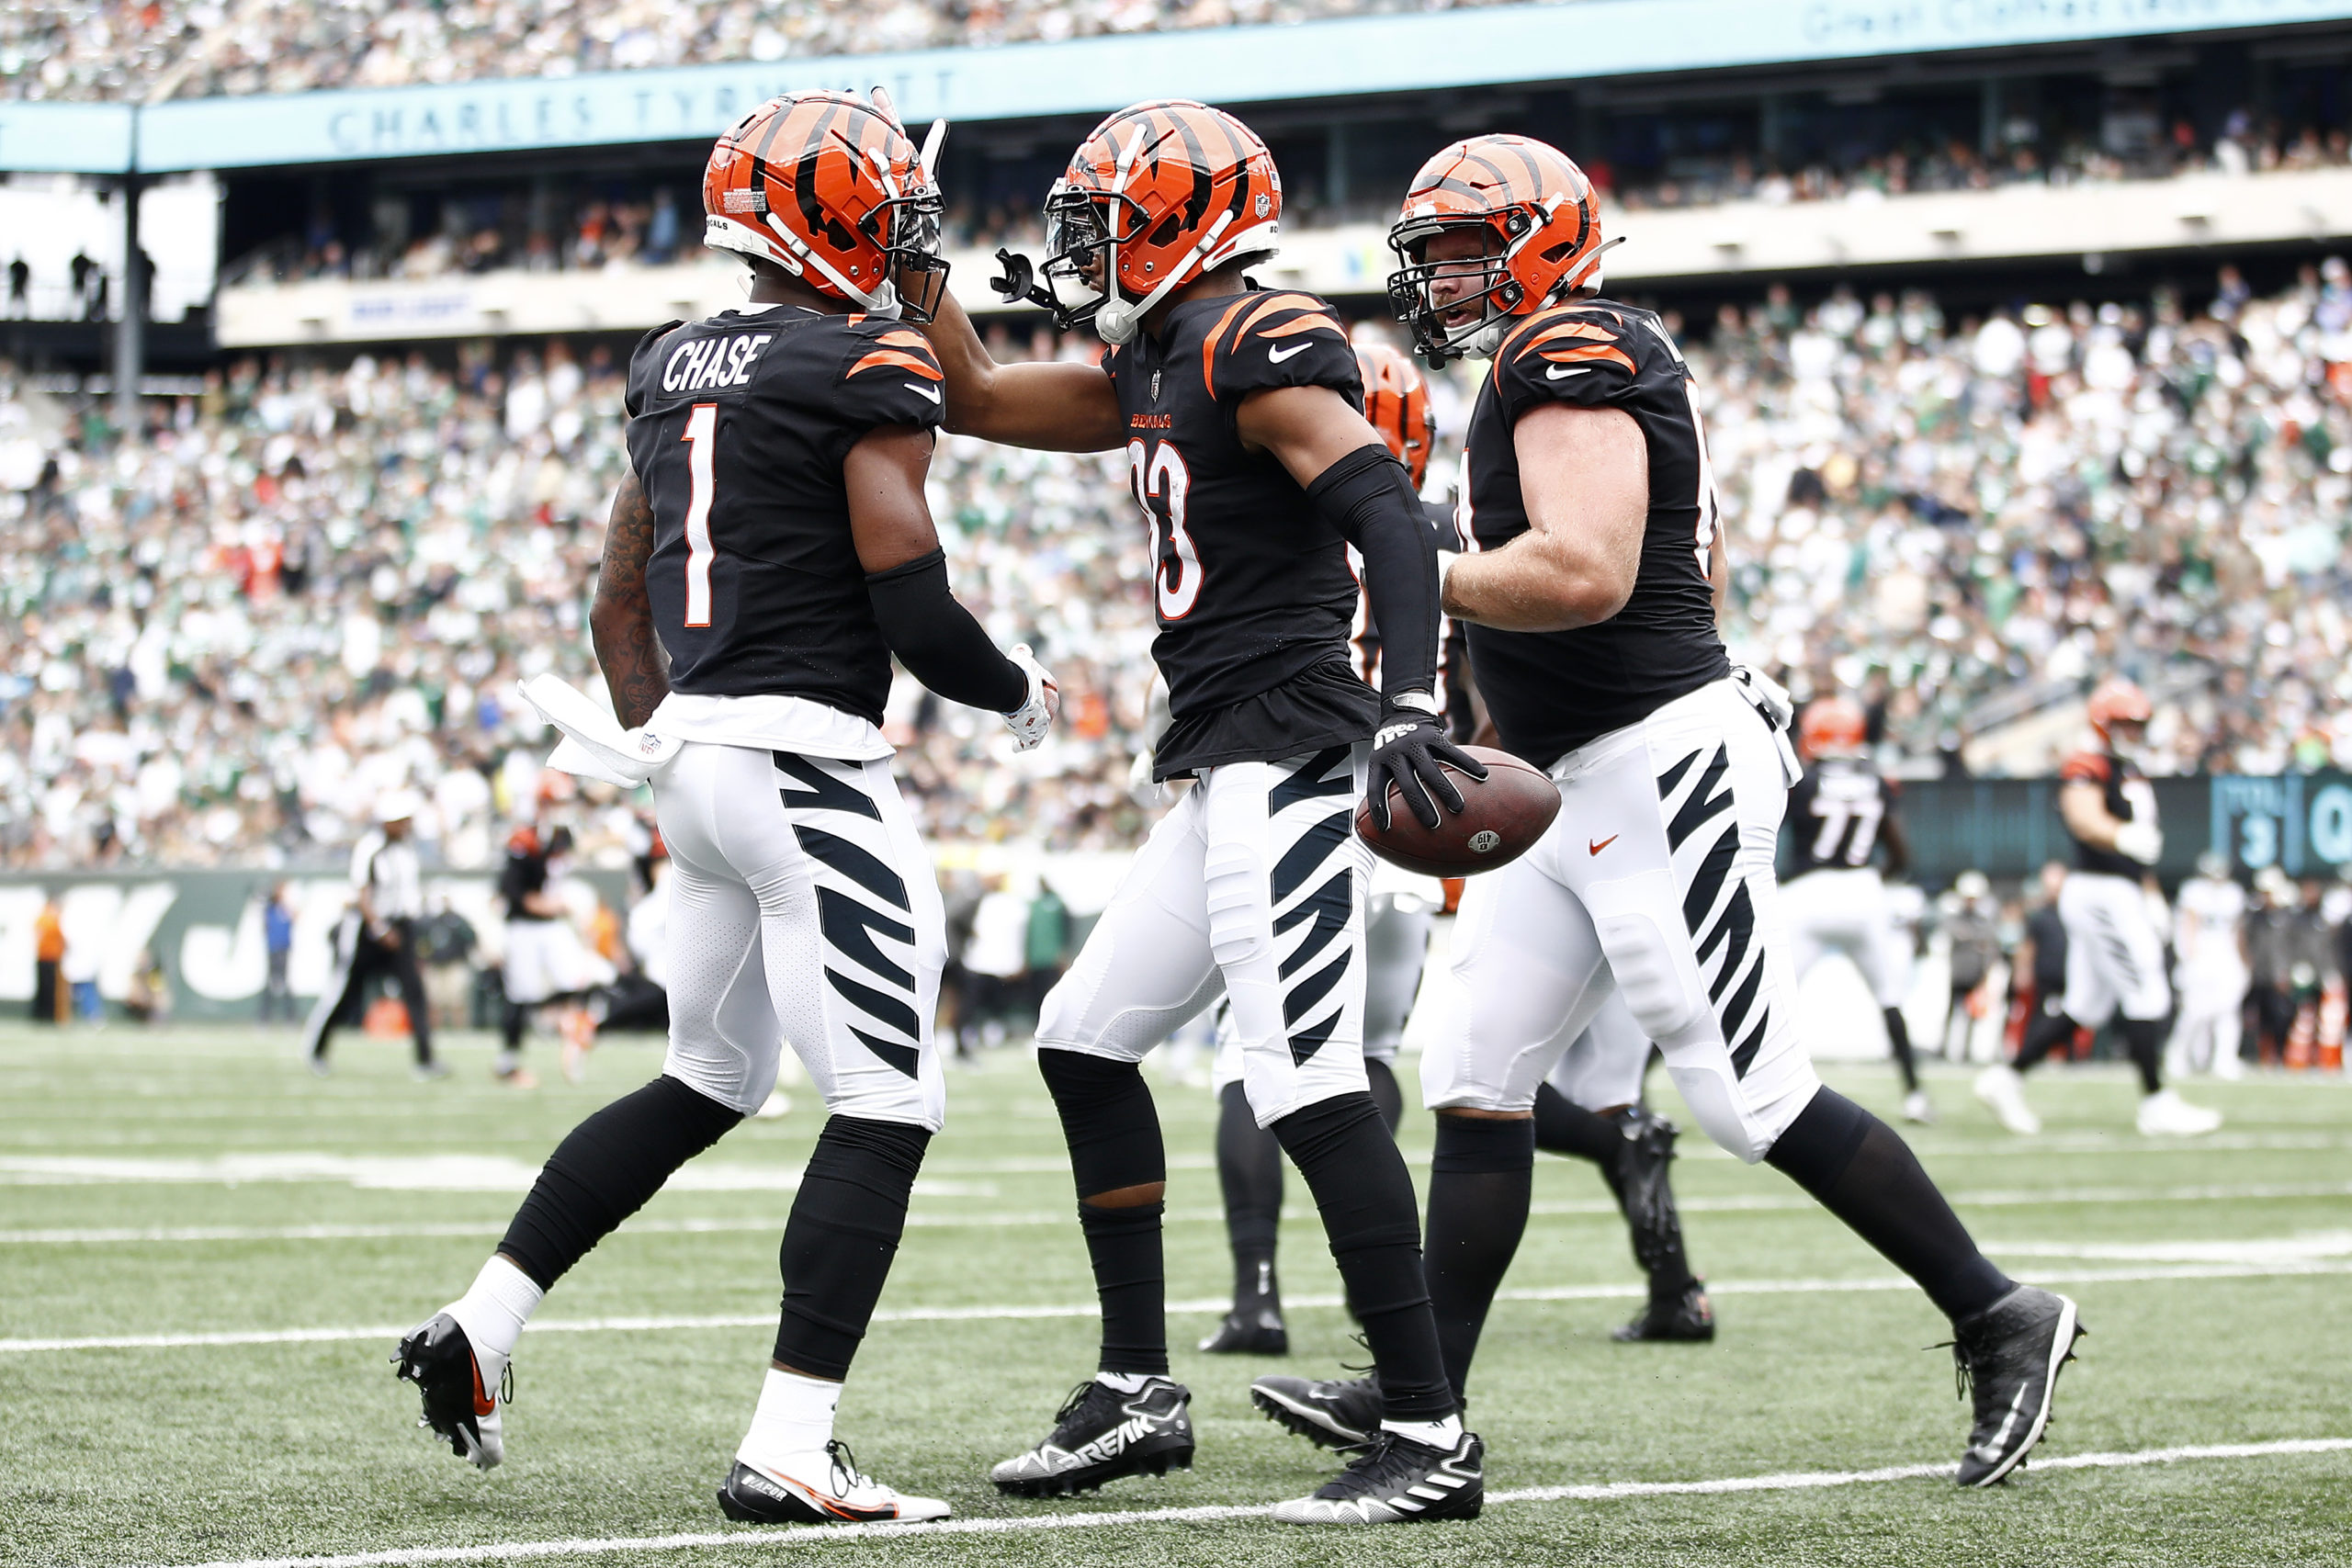 EAST RUTHERFORD, NEW JERSEY - SEPTEMBER 25: Tyler Boyd #83 of the Cincinnati Bengals celebrates with Ja'Marr Chase #1 (L) and Ted Karras #64 (R) after a catch for a touchdown against the New York Jets during the first half at MetLife Stadium on September 25, 2022 in East Rutherford, New Jersey. Sarah Stier/Getty Images